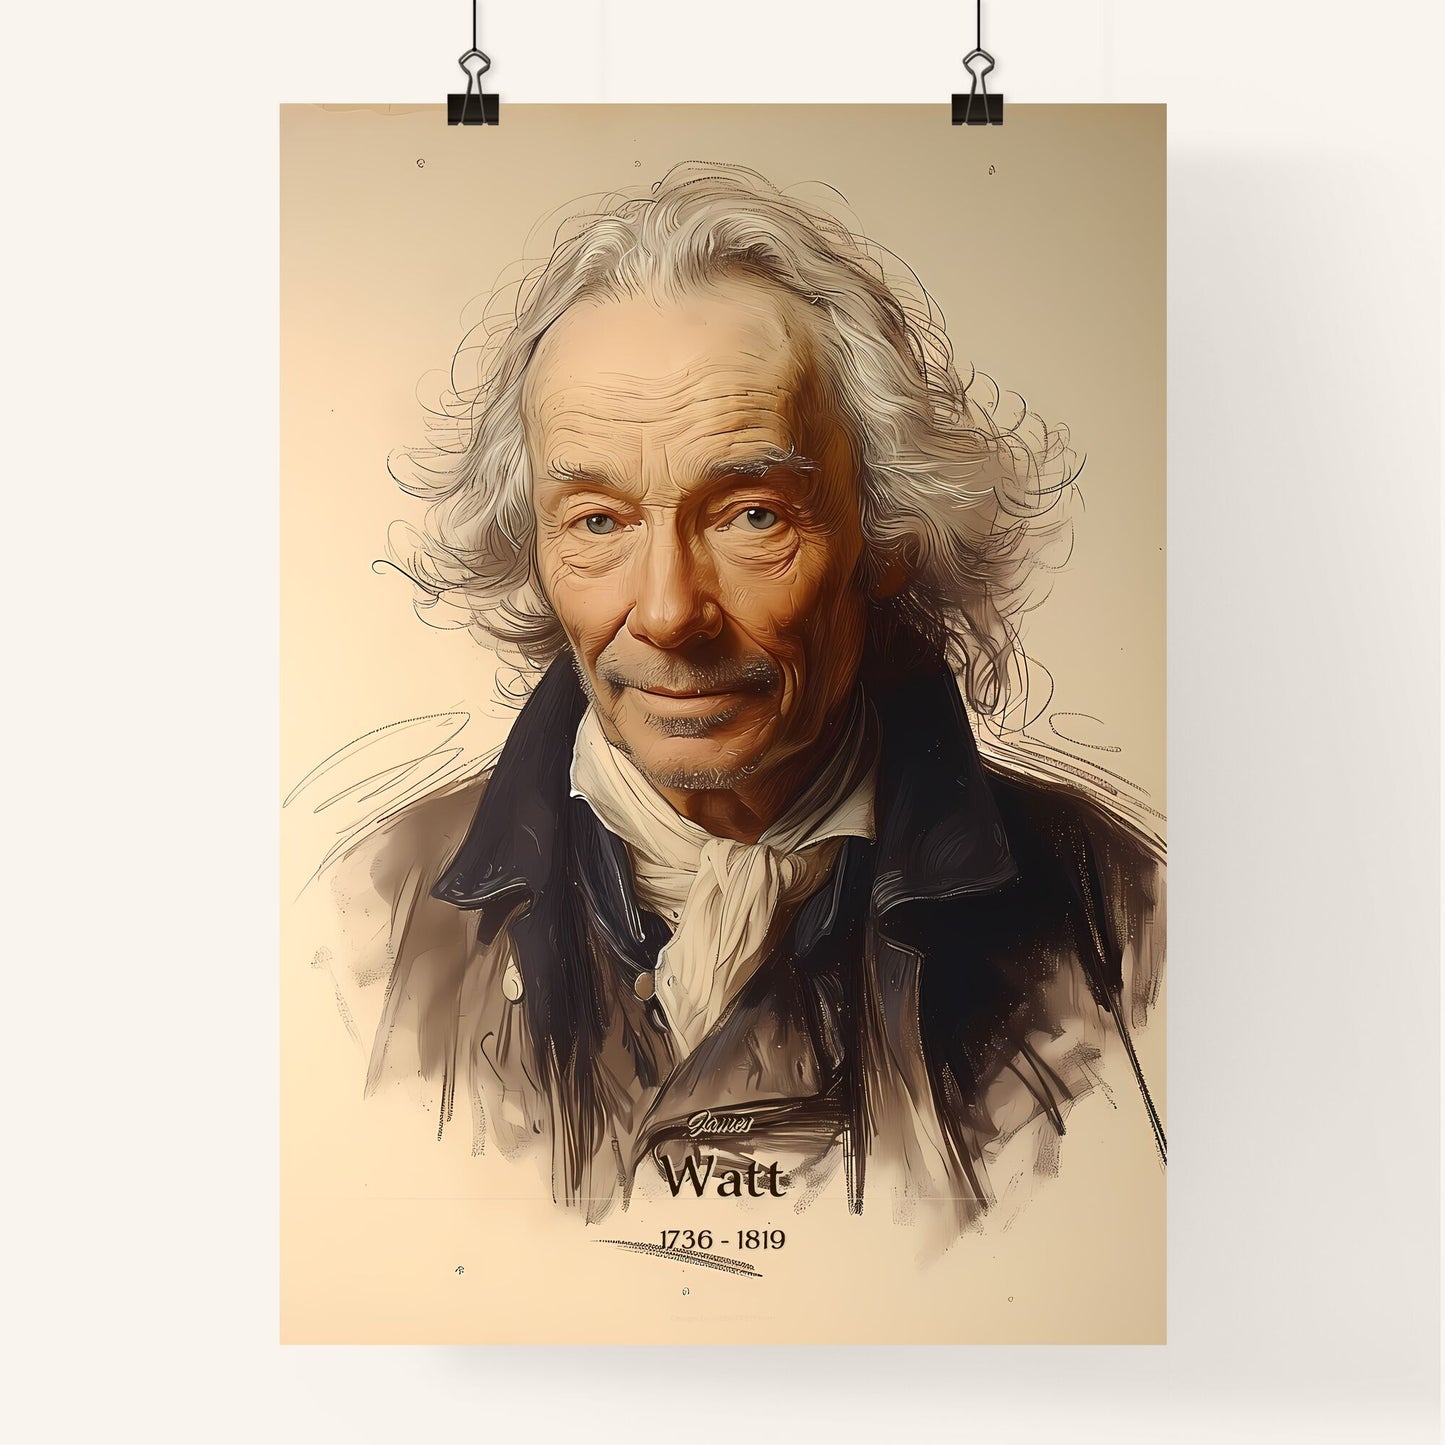 James, Watt, 1736 - 1819, A Poster of a man with white hair and a scarf Default Title